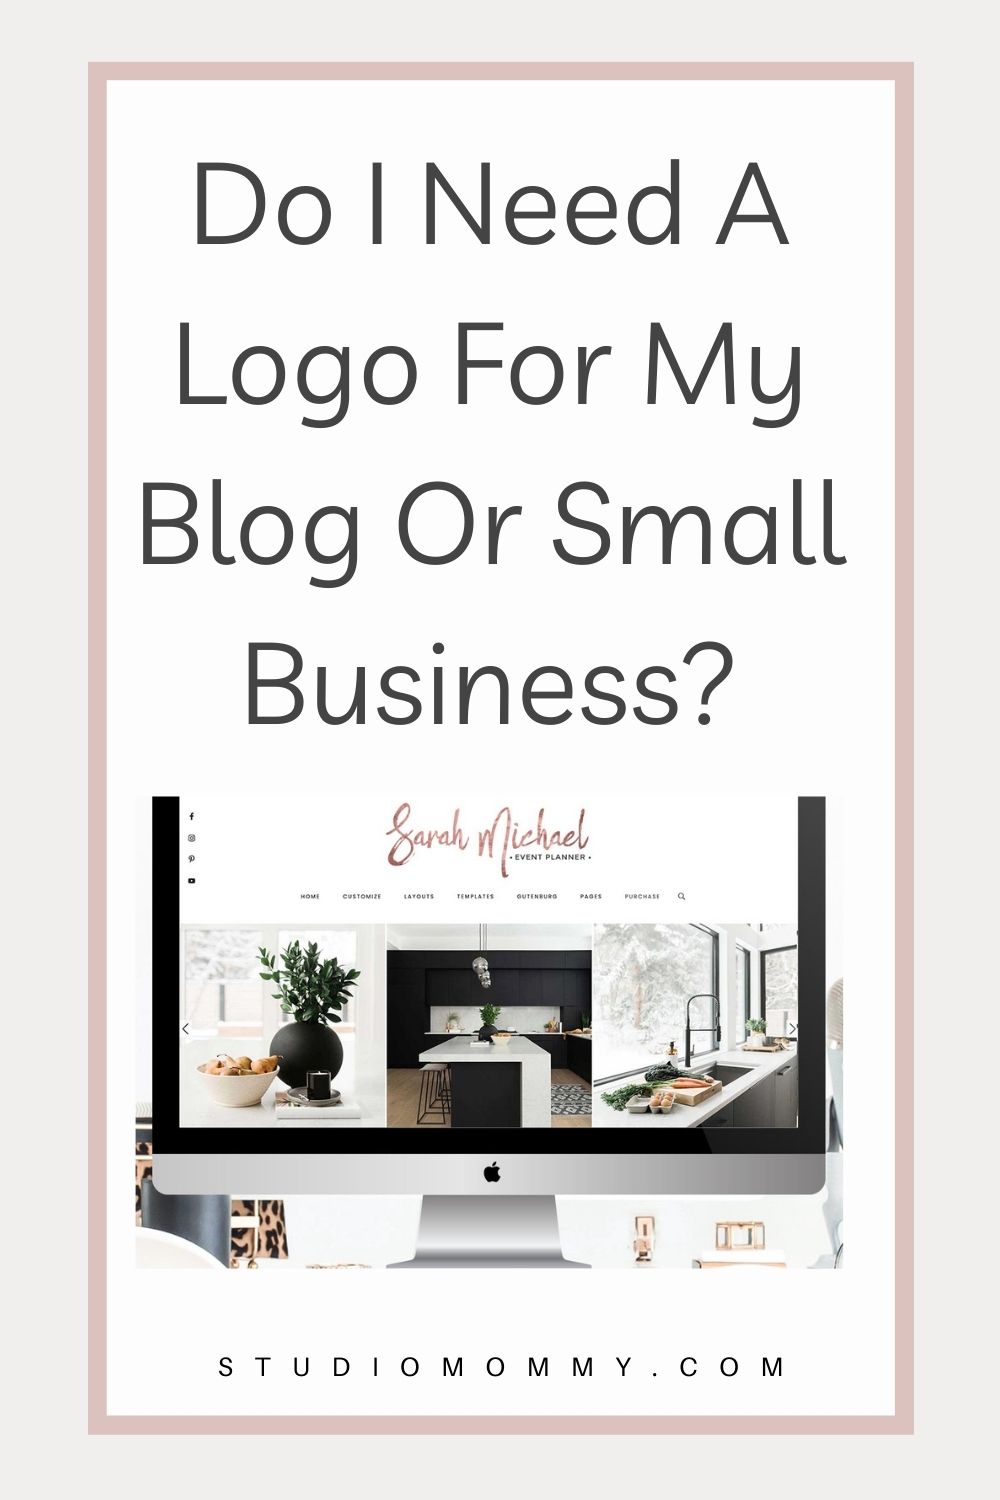 A question that I get asked quite often by my clients.  And the answer is always the same.  Yes, you should have a logo for your blog or business.  When starting the branding process, a professional logo should be on the top of your to-do list.  Why do I need a logo, you ask?  Here are a few good reasons why logos are important.